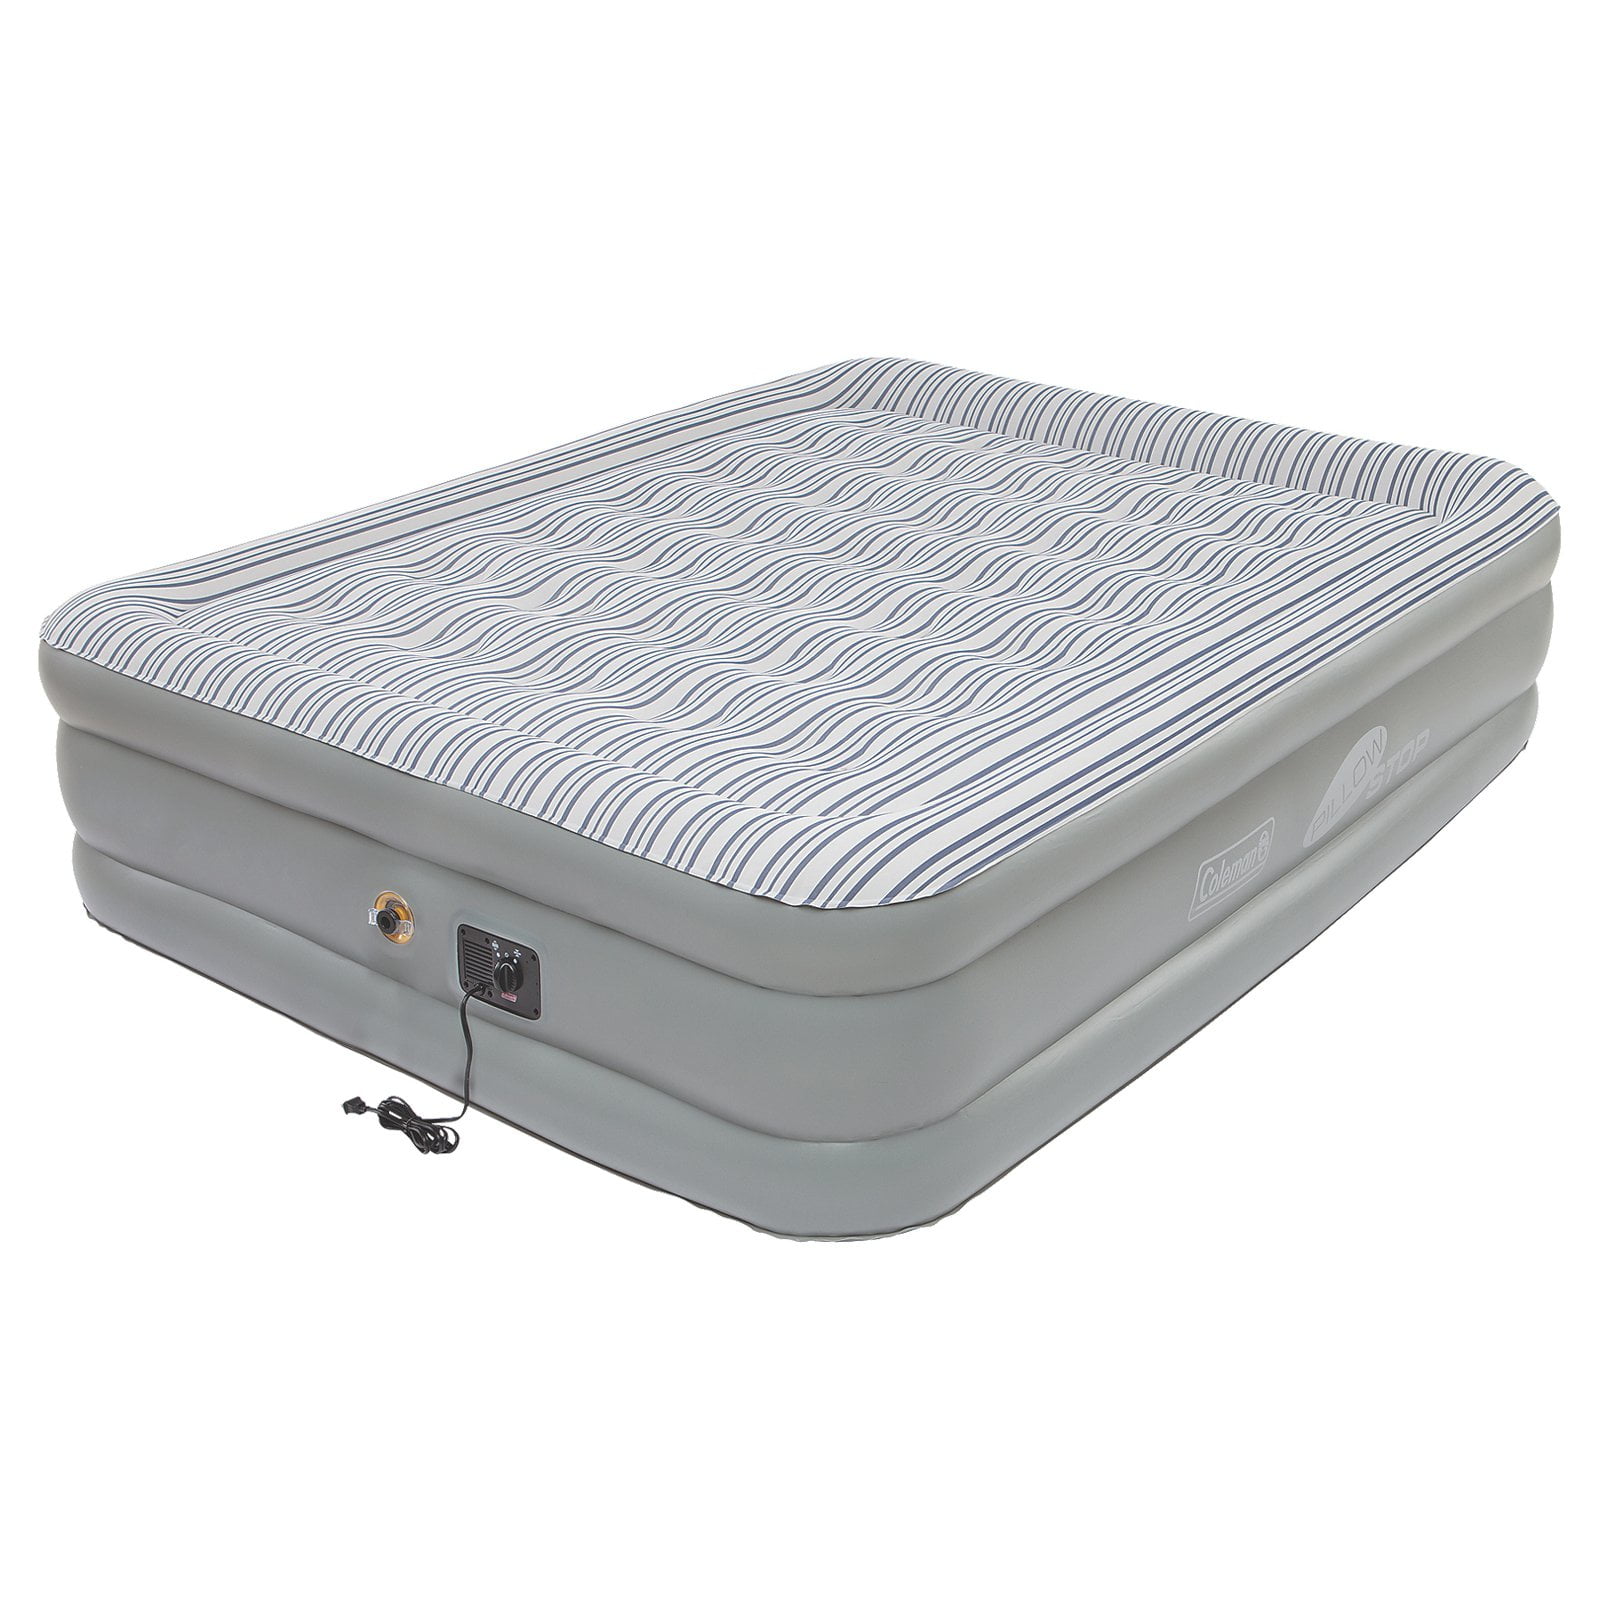 Coleman Premium Double-High Quickbed Air Bed with Built-In ...